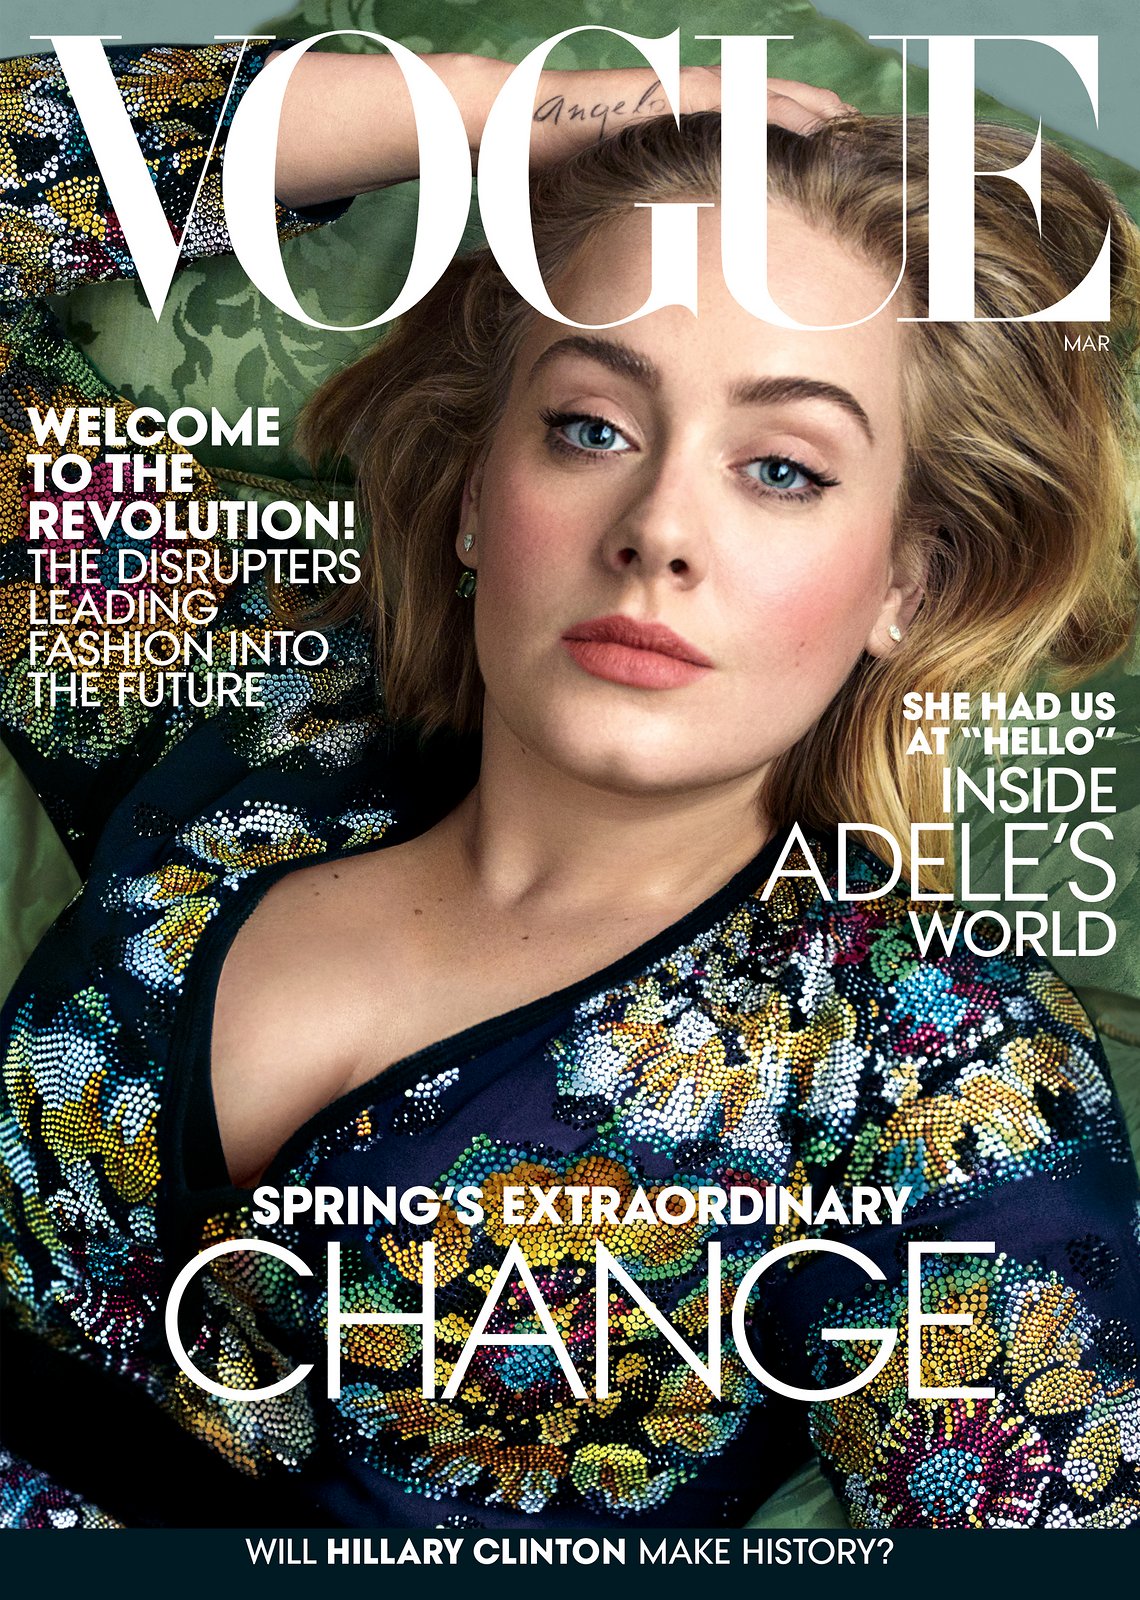 Adele on cover of VOGUE 8